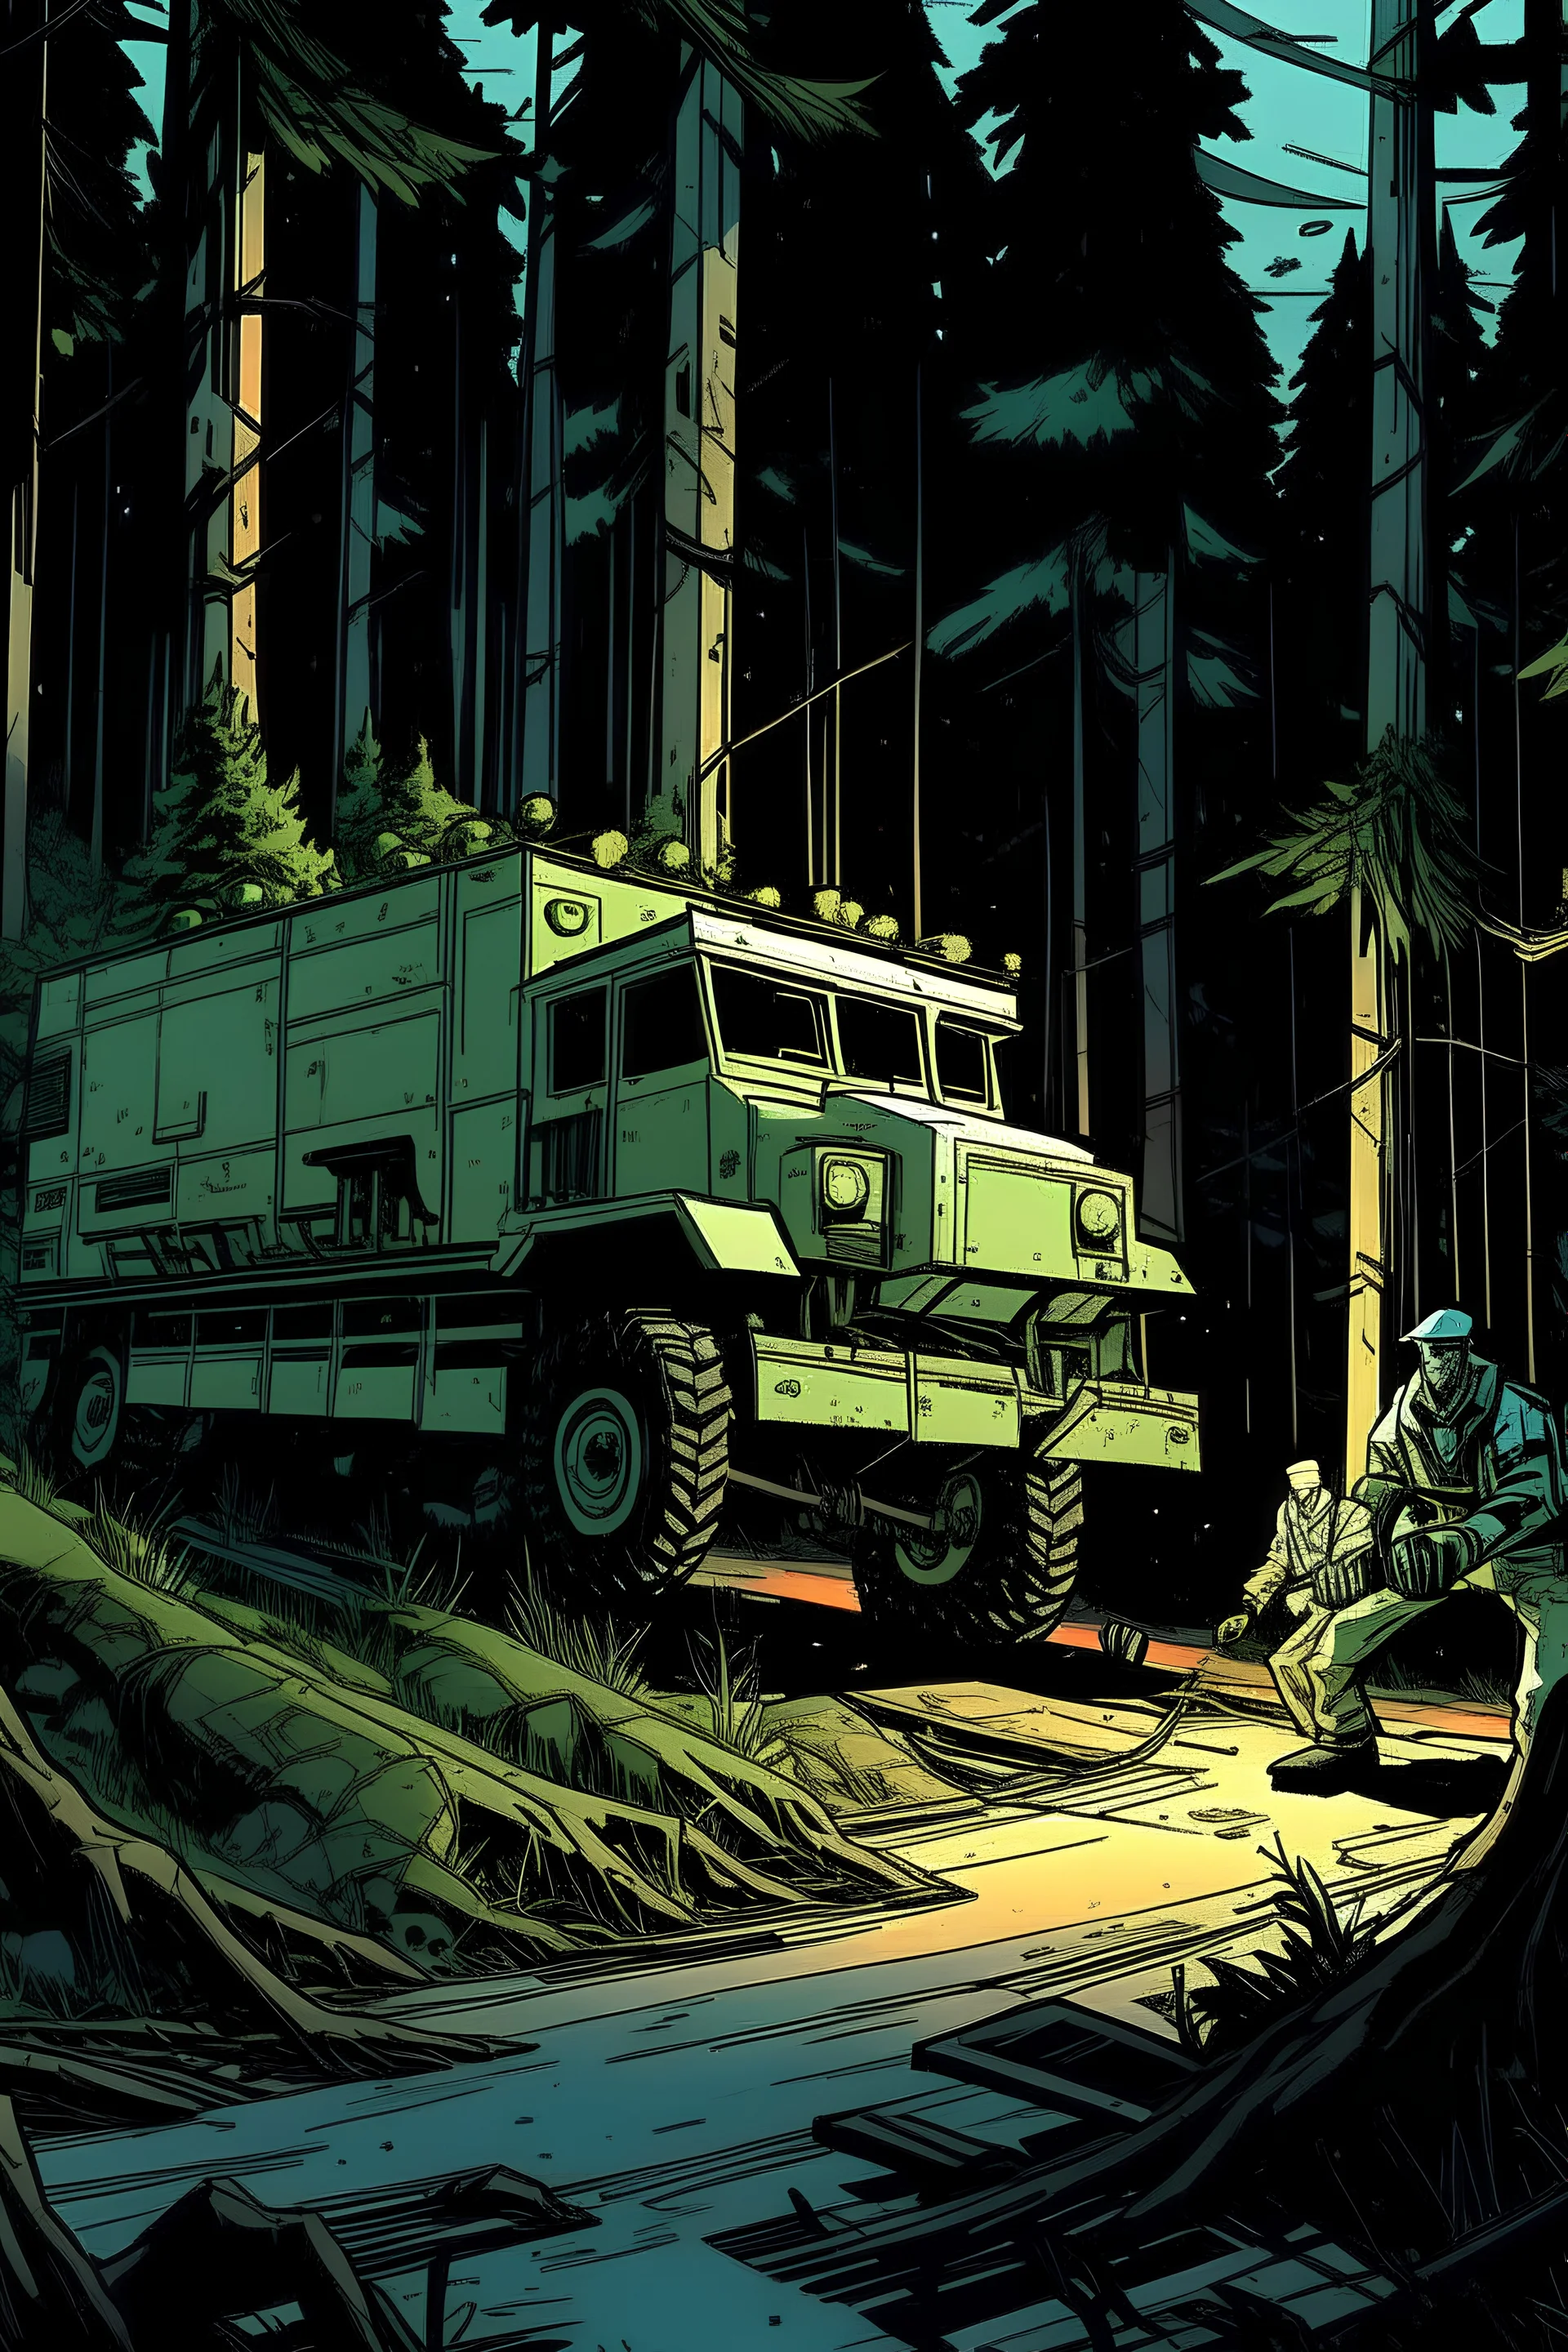 modern American comics, at night, Under a big futuristic cargo truck in the forest, the guards spot the enemies lurking in the woods